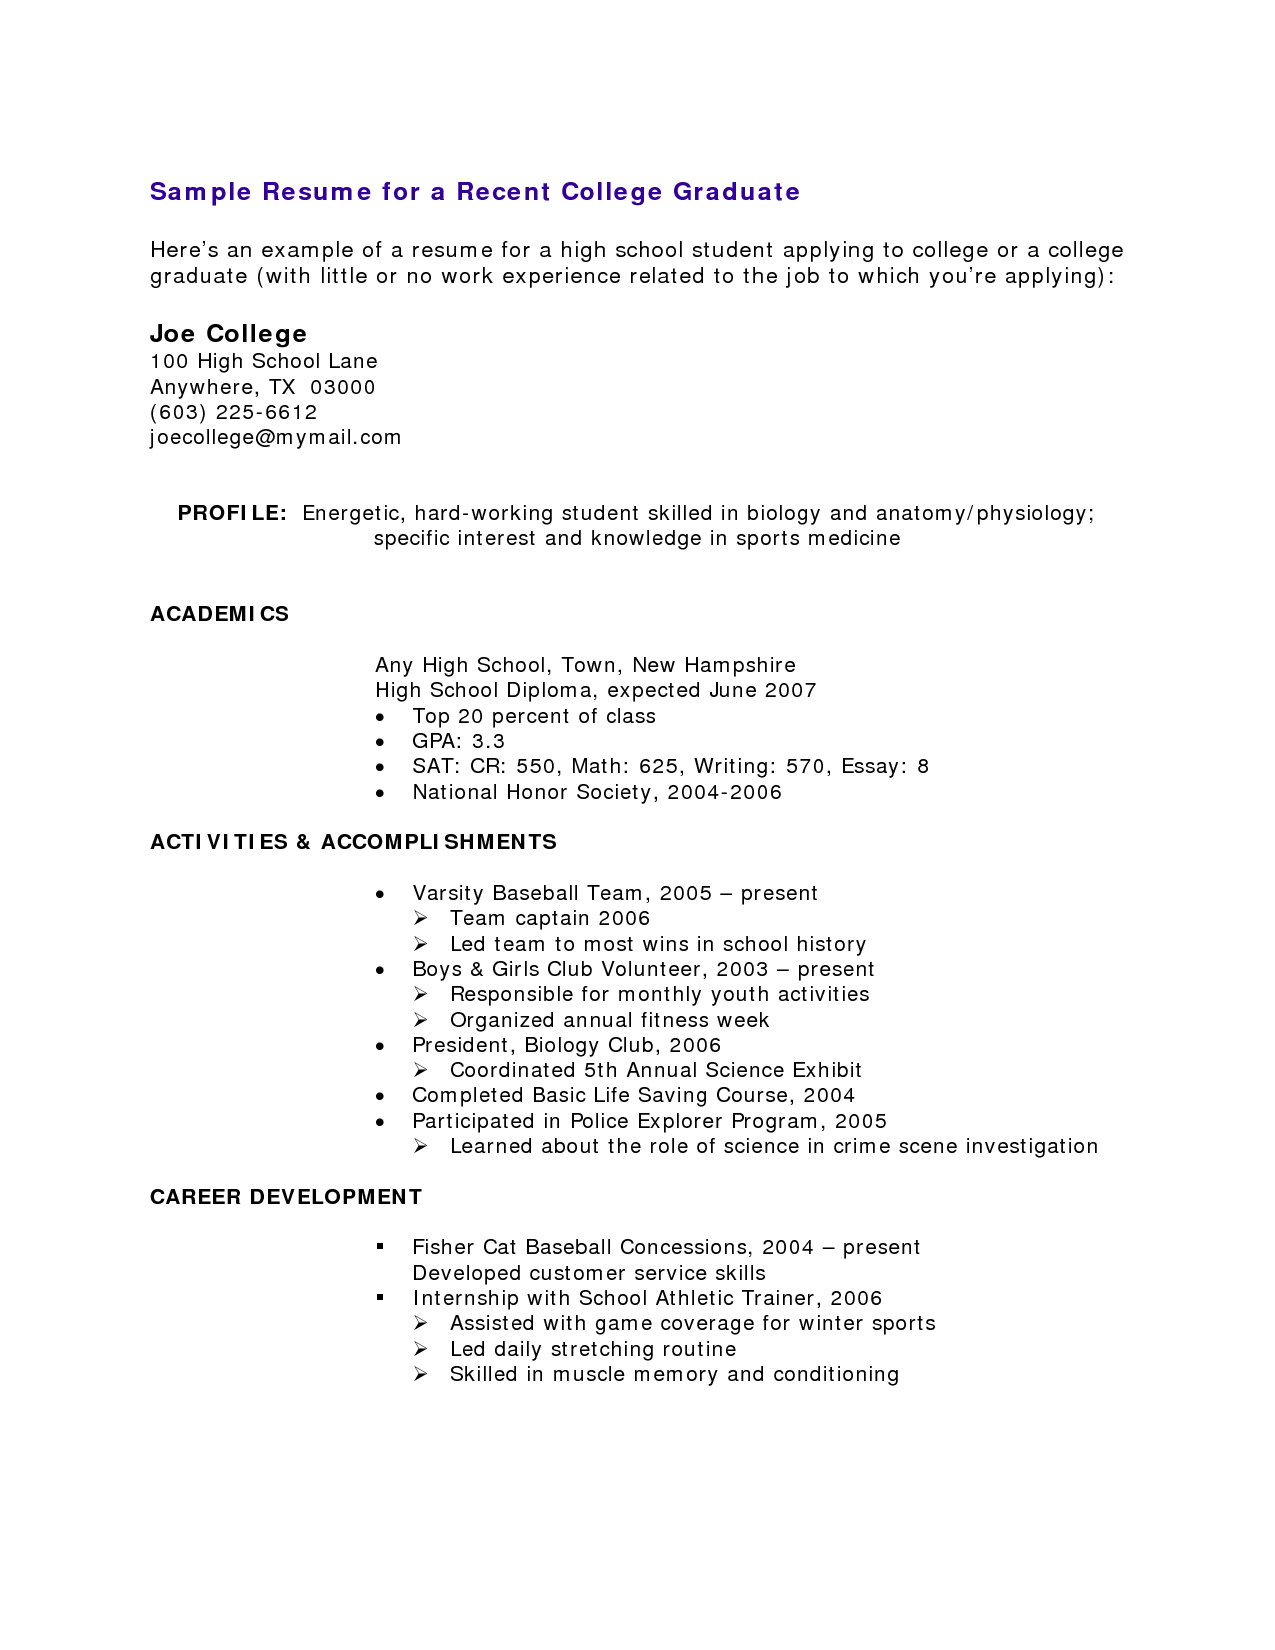 No Work Experience 3 Resume Templates Pinterest Sample Resume throughout size 1275 X 1650